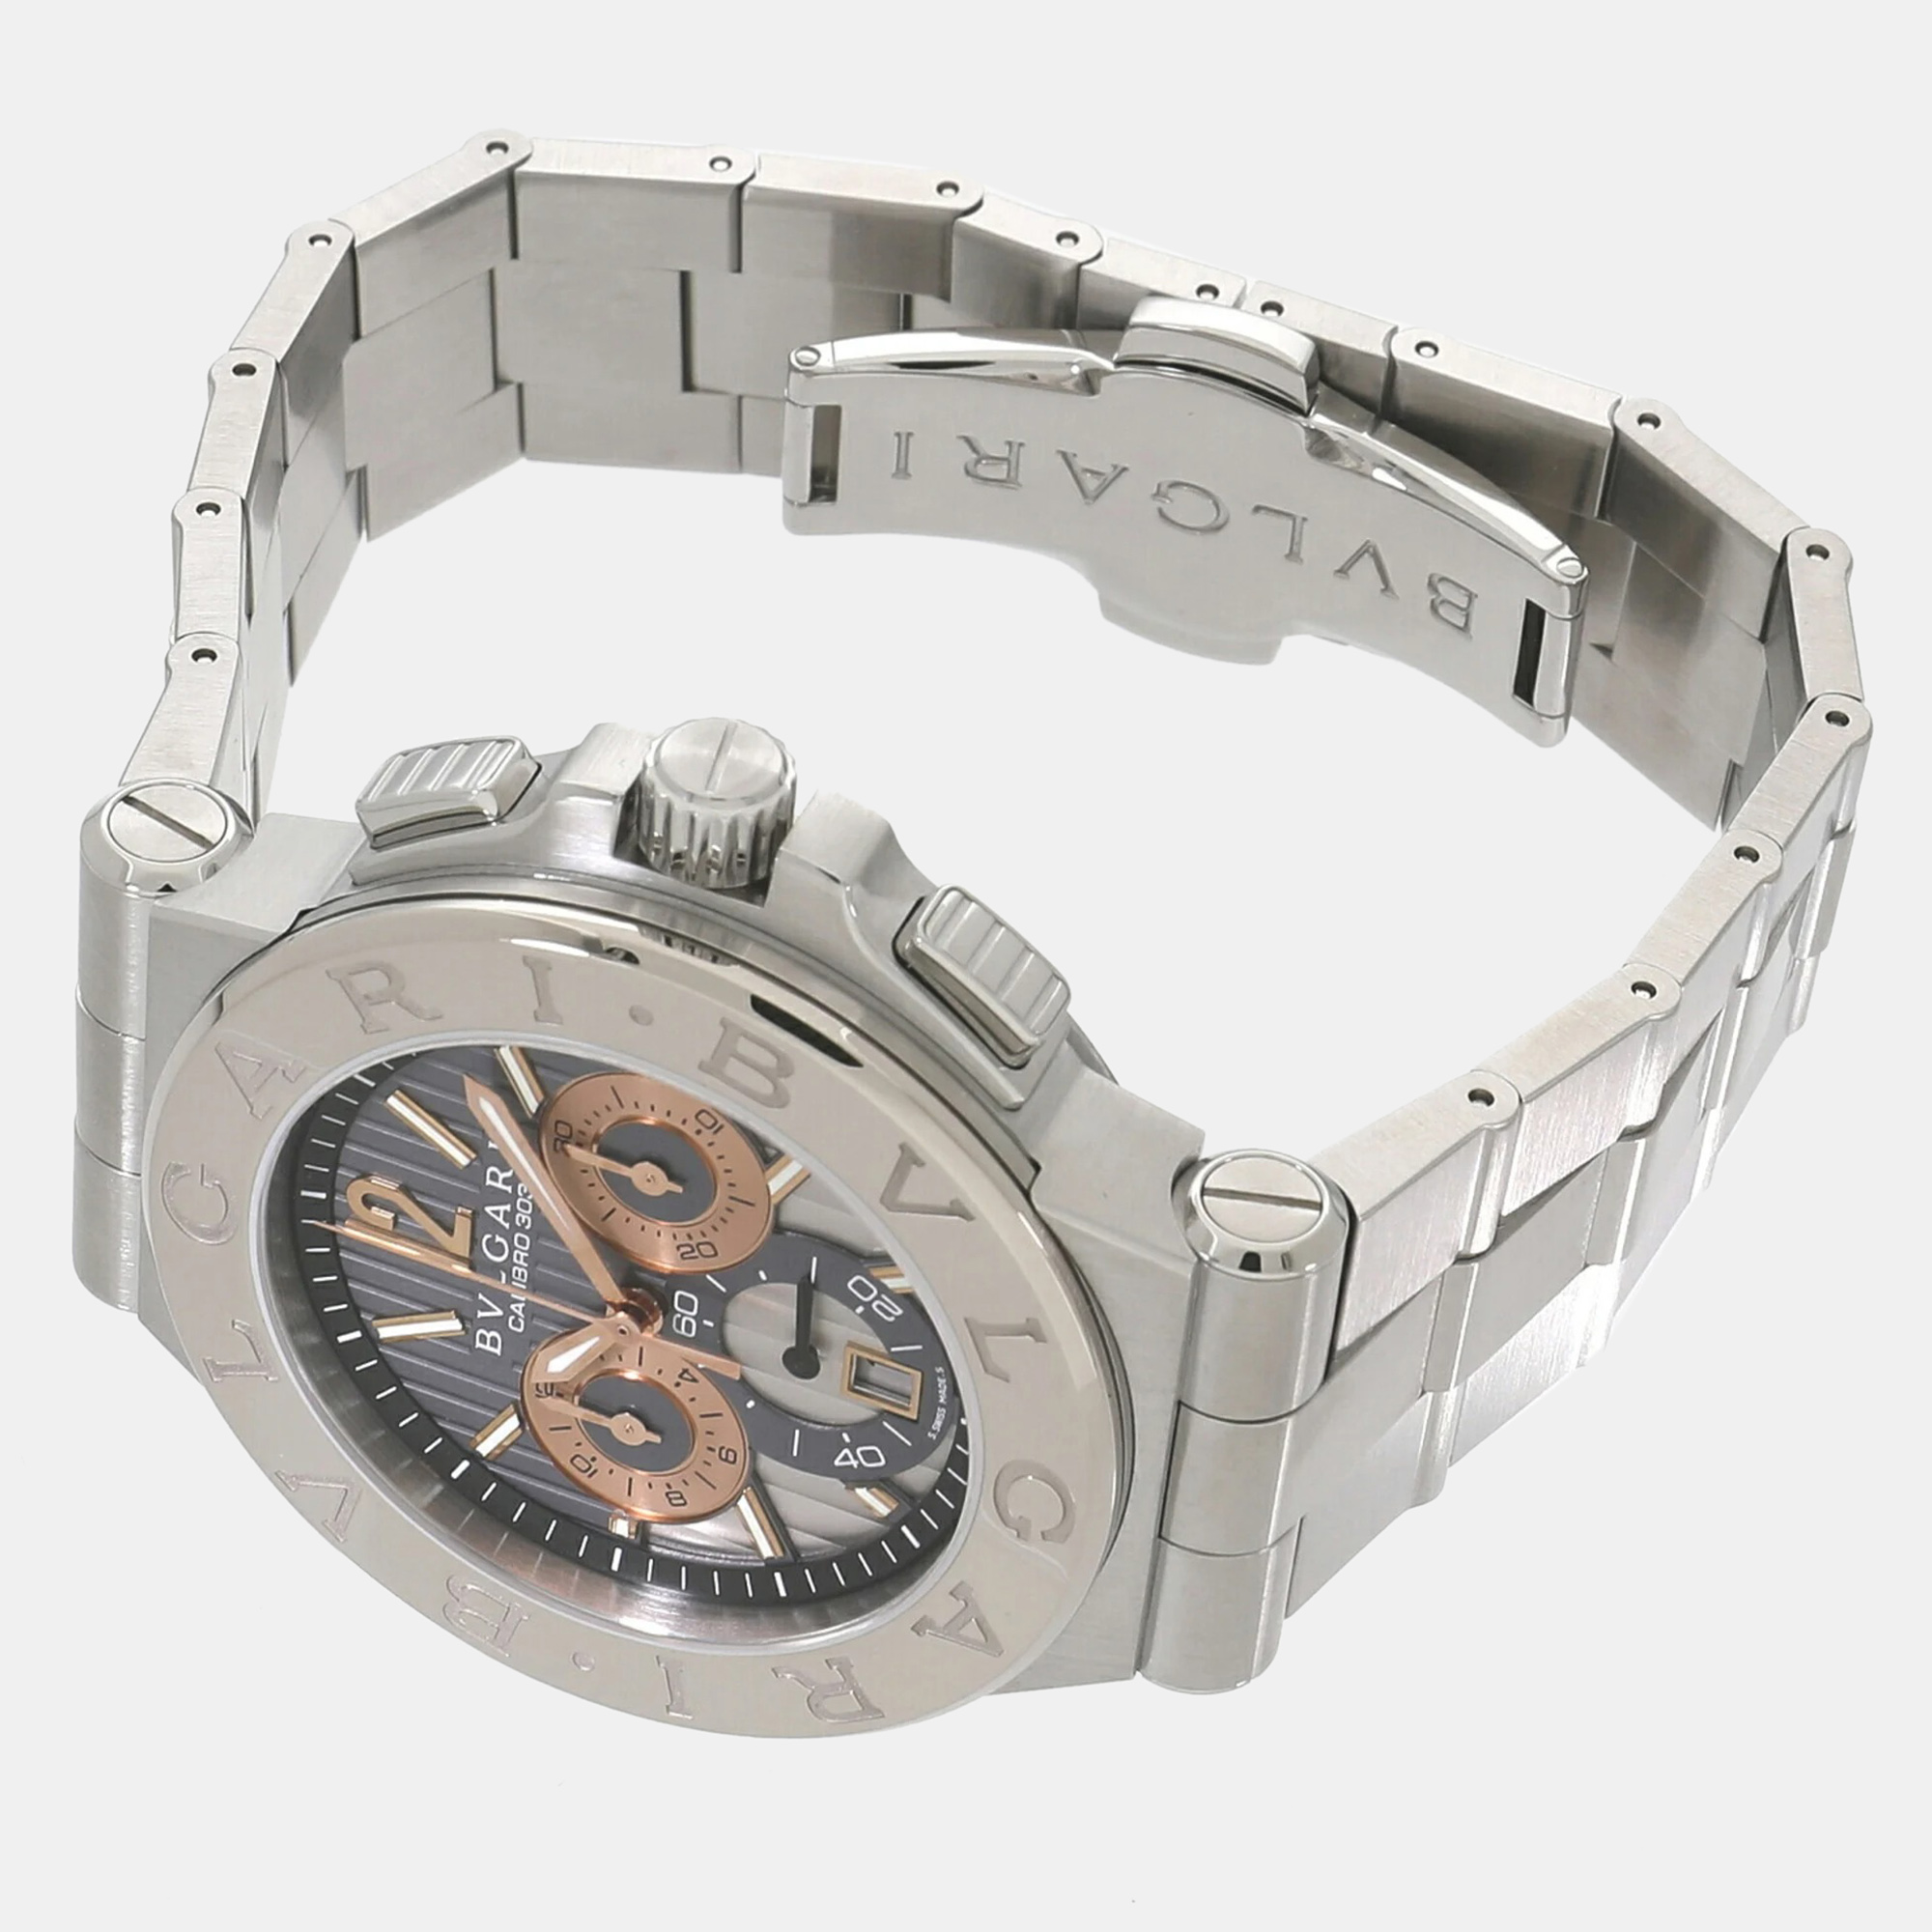 

Bvlgari Grey 18k White Gold And Stainless Steel Diagono DG42C14SWGSDCH Automatic Men's Wristwatch 42 mm